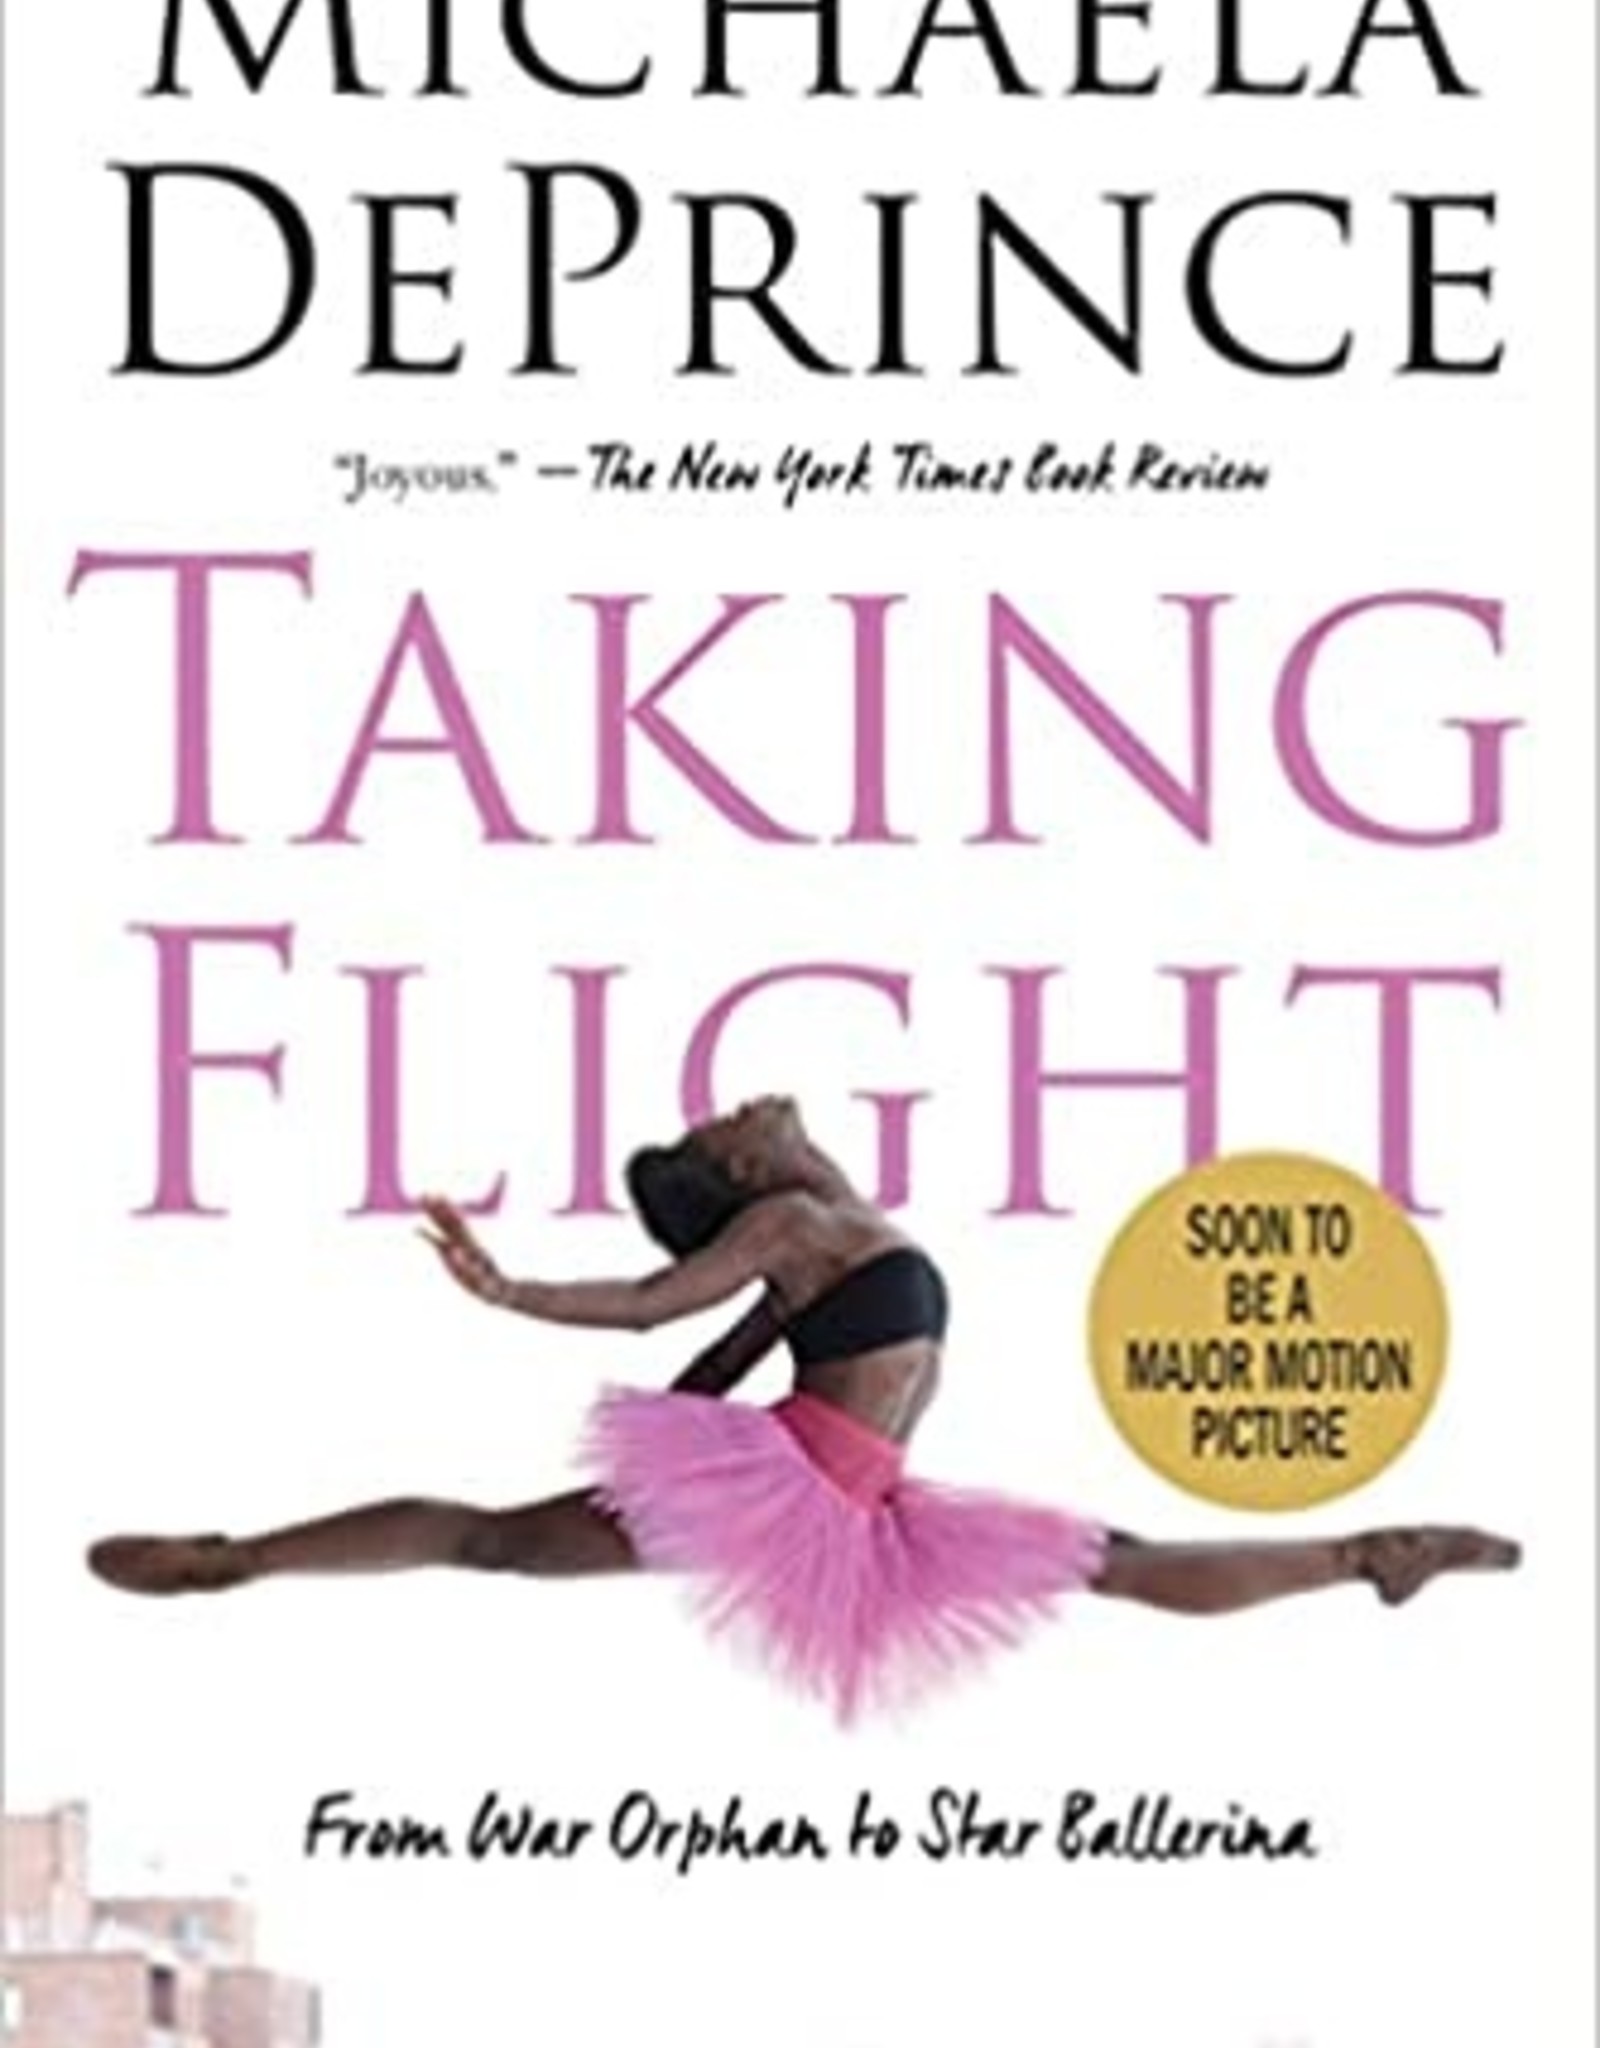 Taking Flight "From War Orphan To Star Ballerina" Soft Cover Book